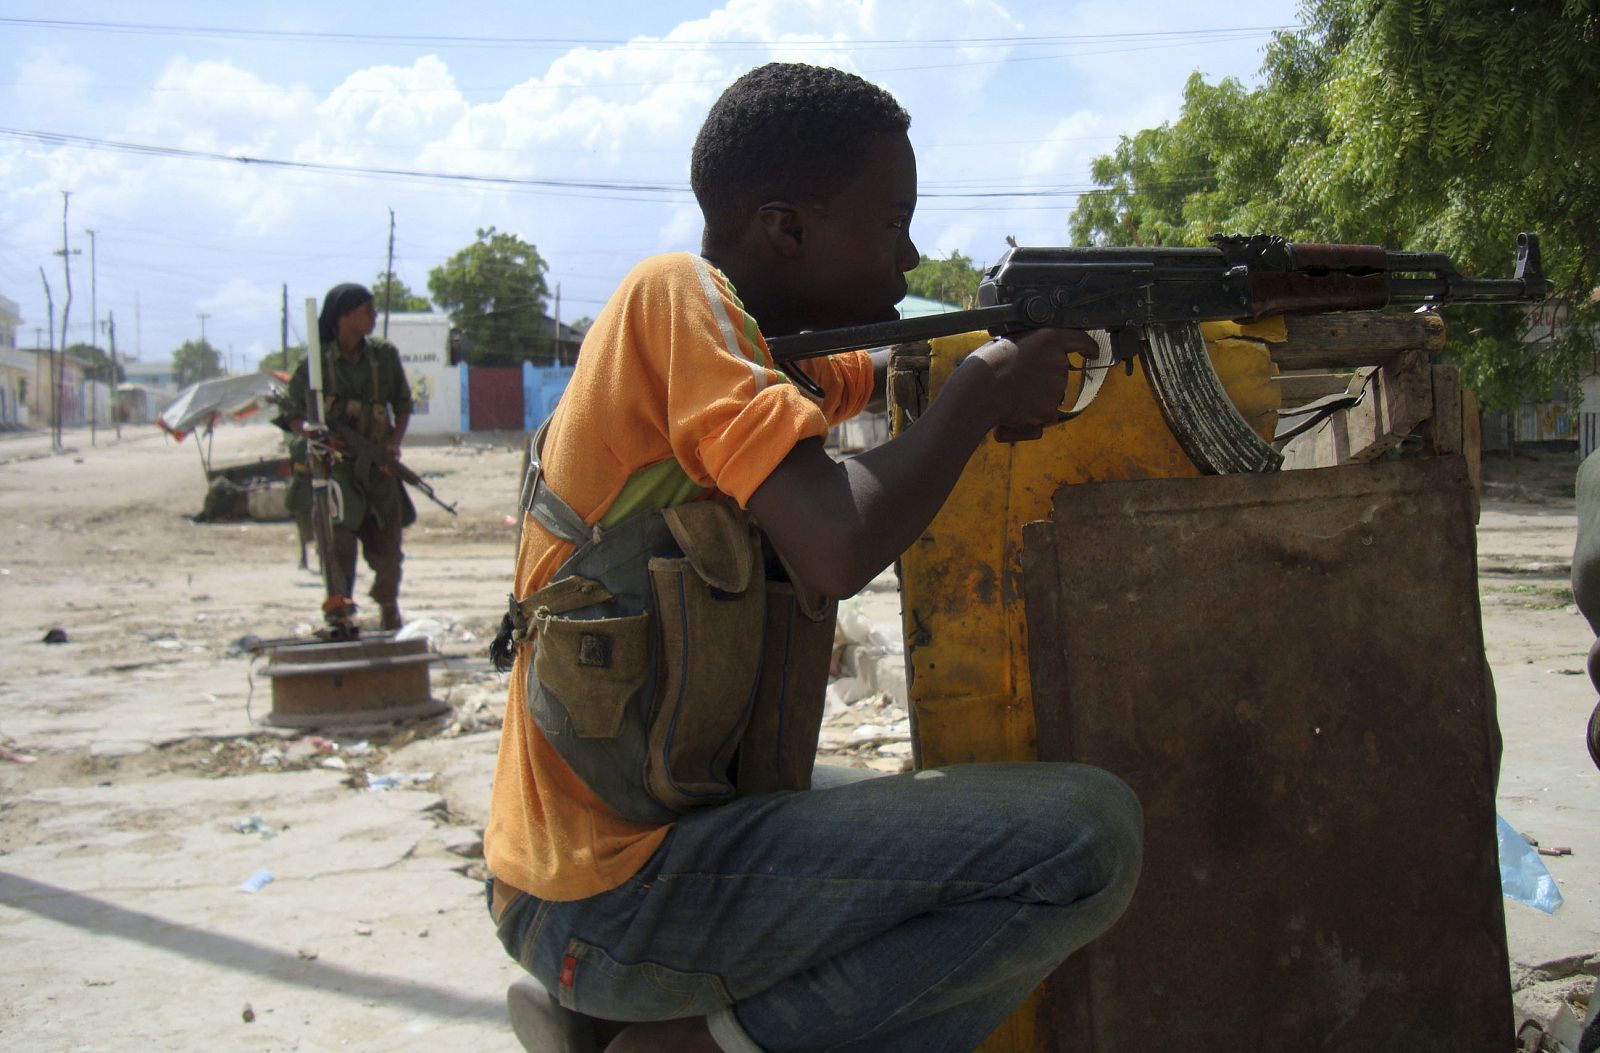 Somali Islamist fighters hold their weapons in defensive positions near road that links to the presidential palace in the capital Mogadishu